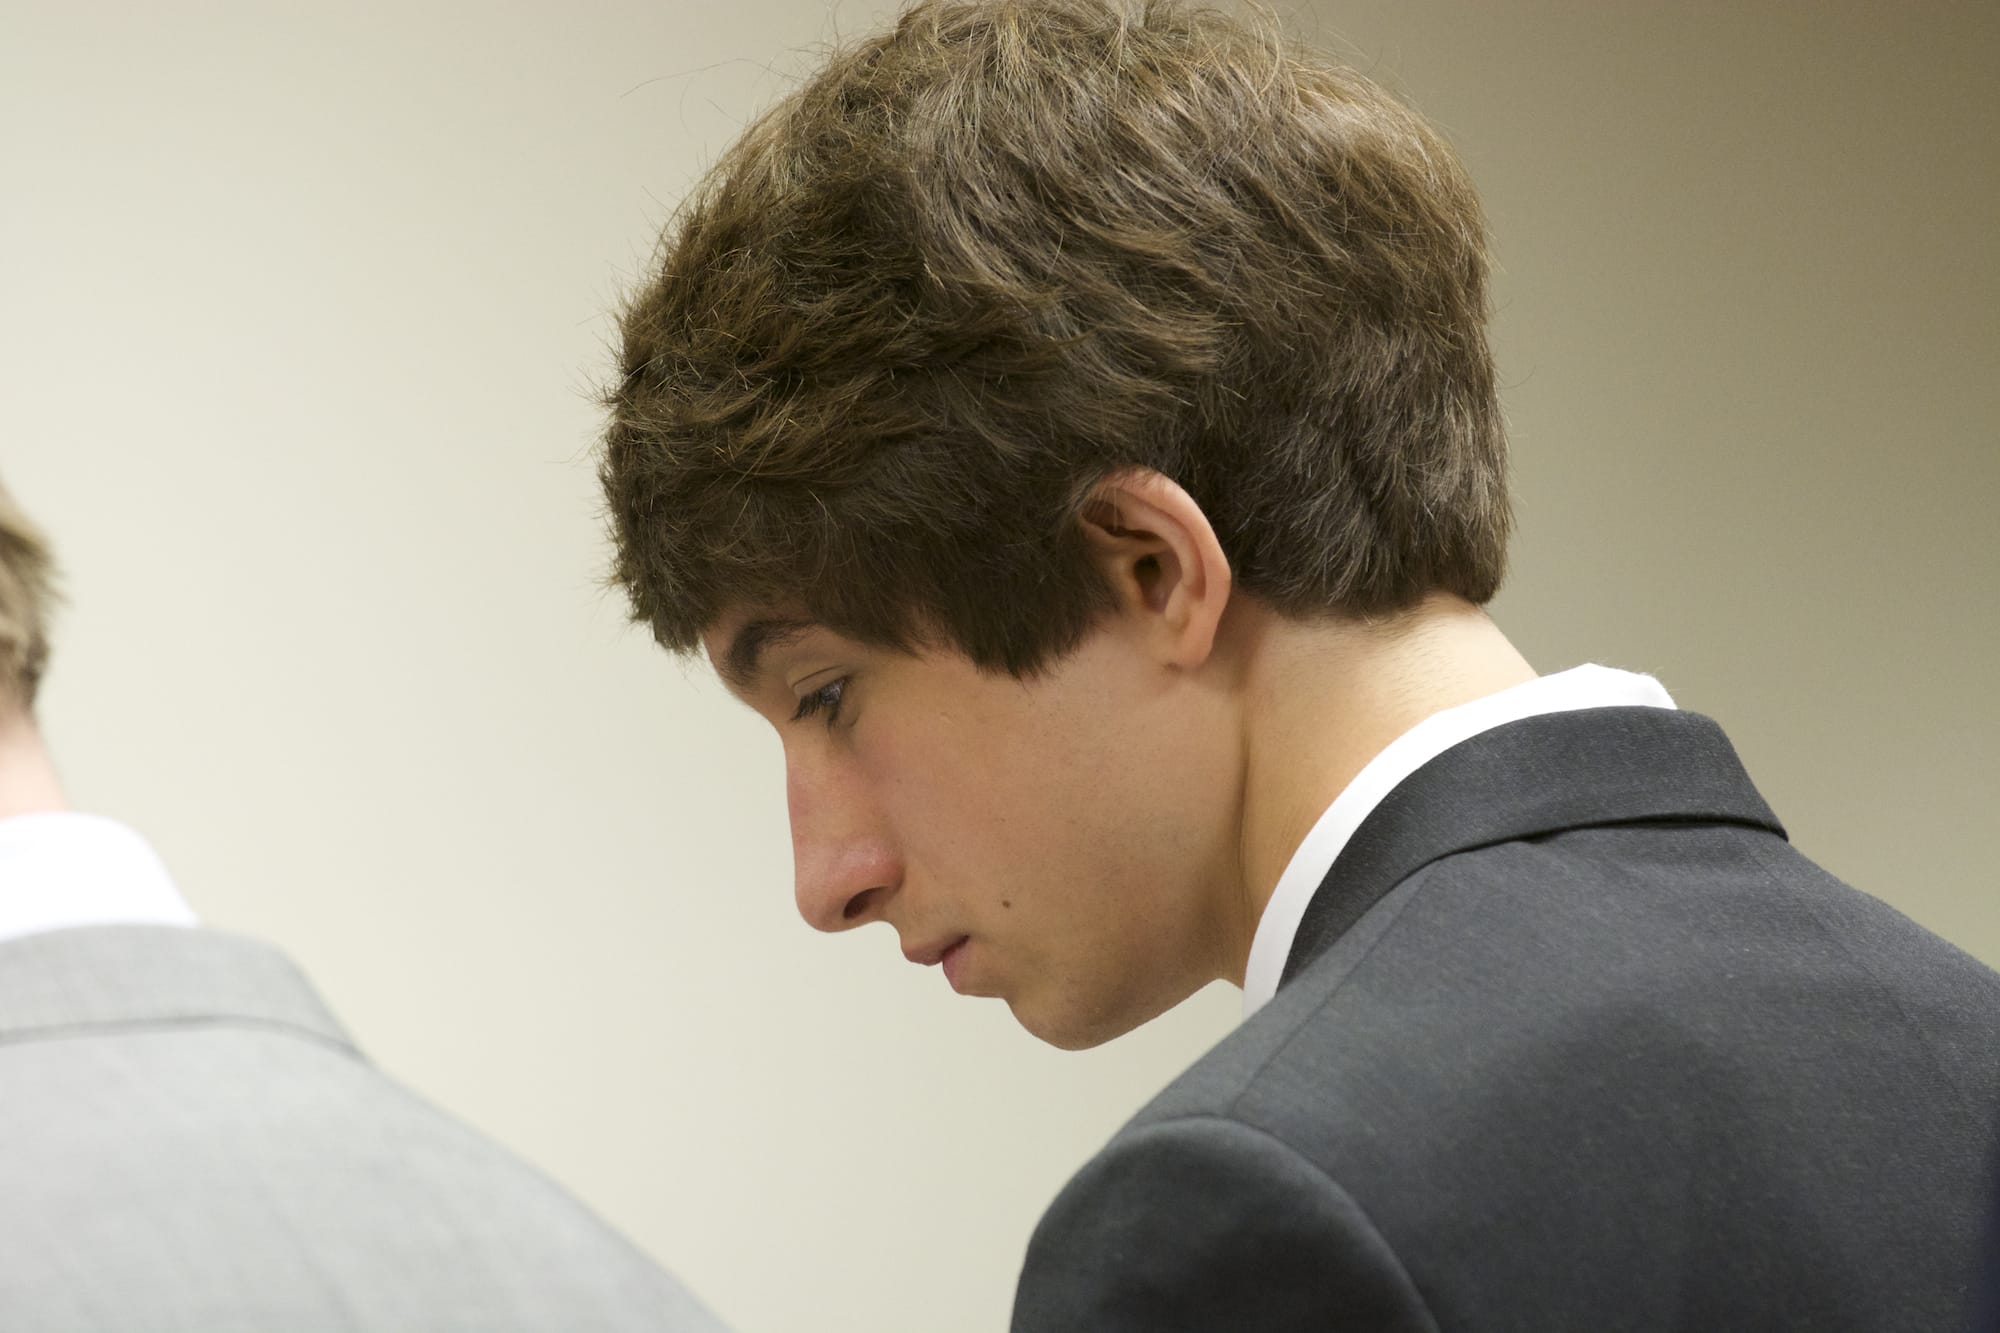 Dylan Mork has pleaded guilty to second-degree arson in connection to the Feb.